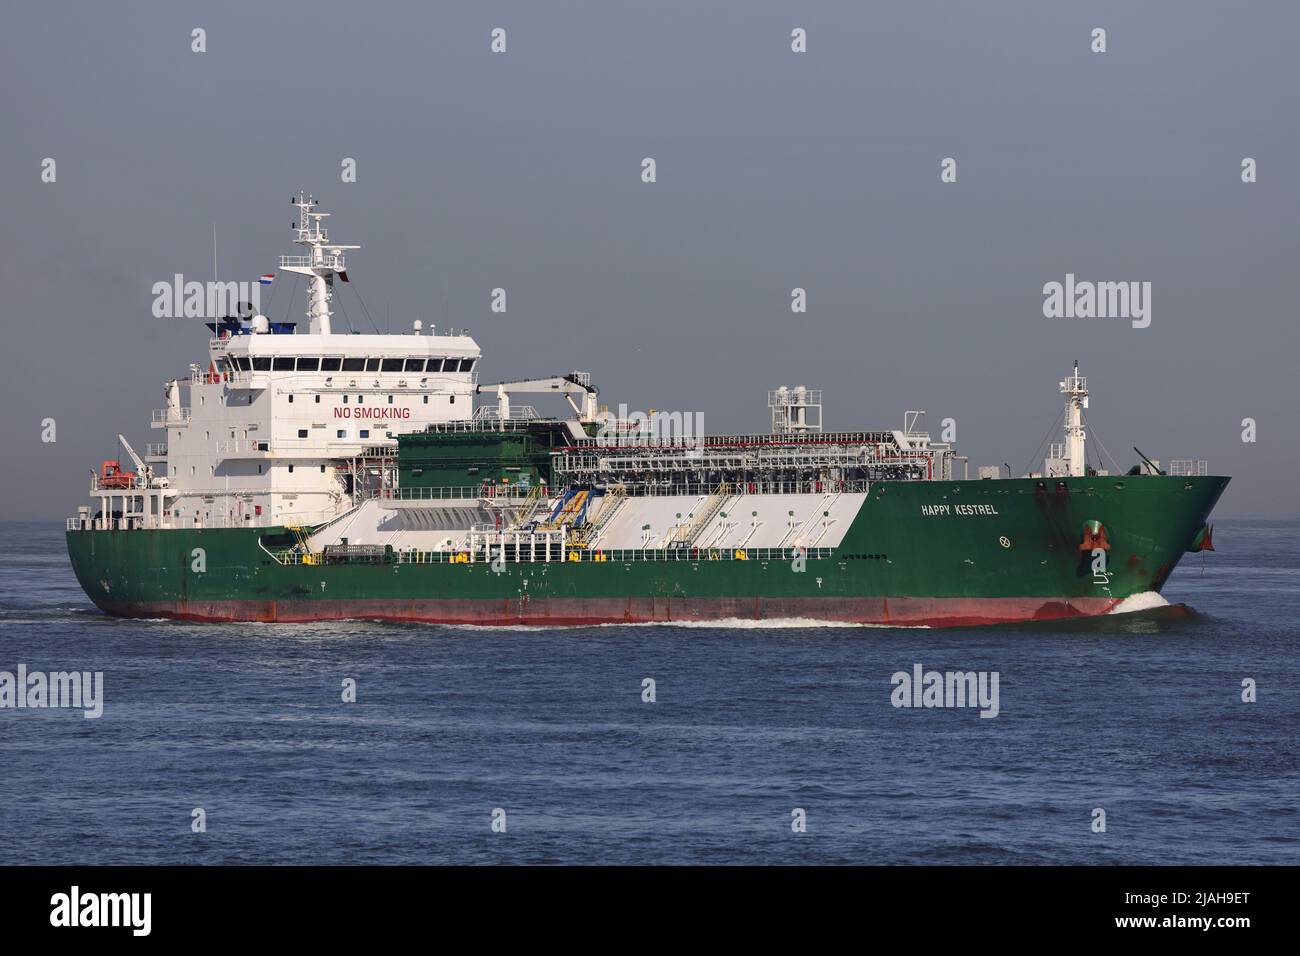 The LPG tanker Happy Kestrel arrives in the port of Rotterdam on March 18, 2022. Stock Photo